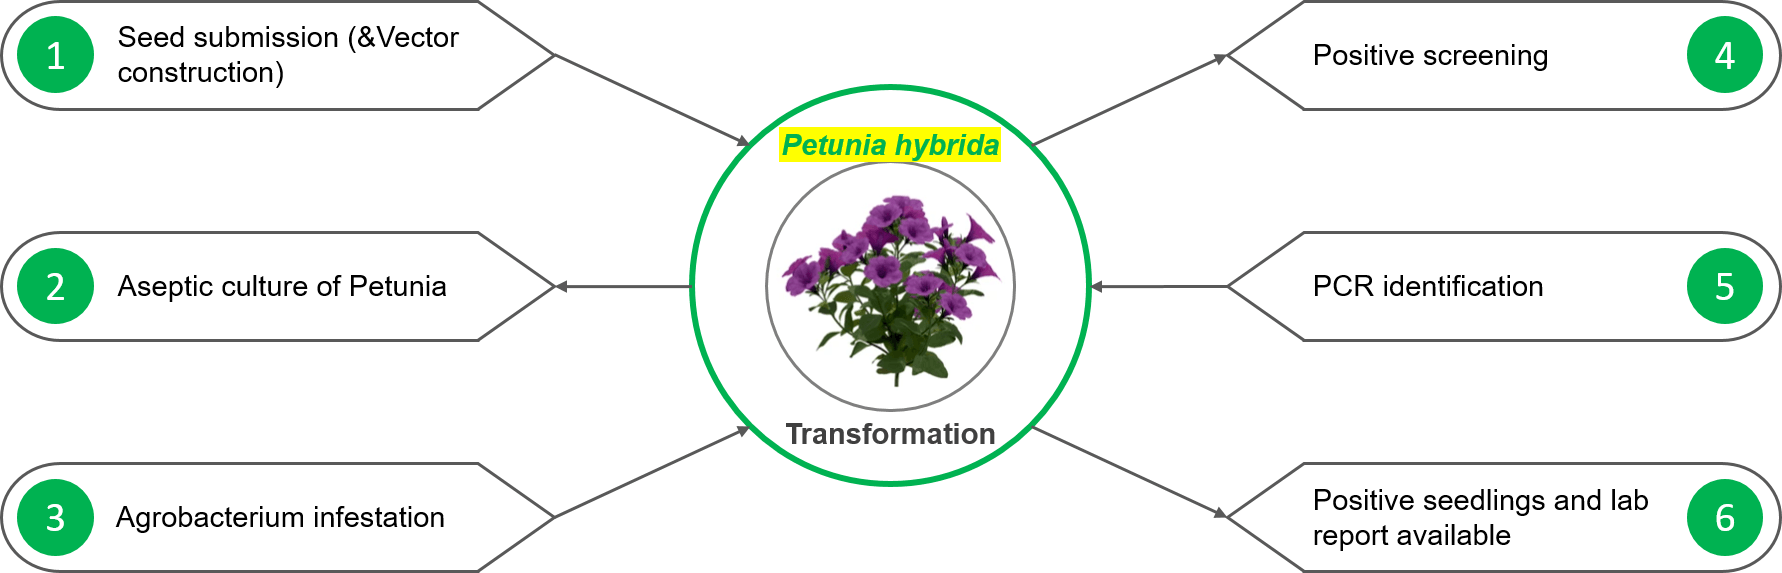 Schematic diagram of the standardized process of petunia genetic transformation. - Lifeasible